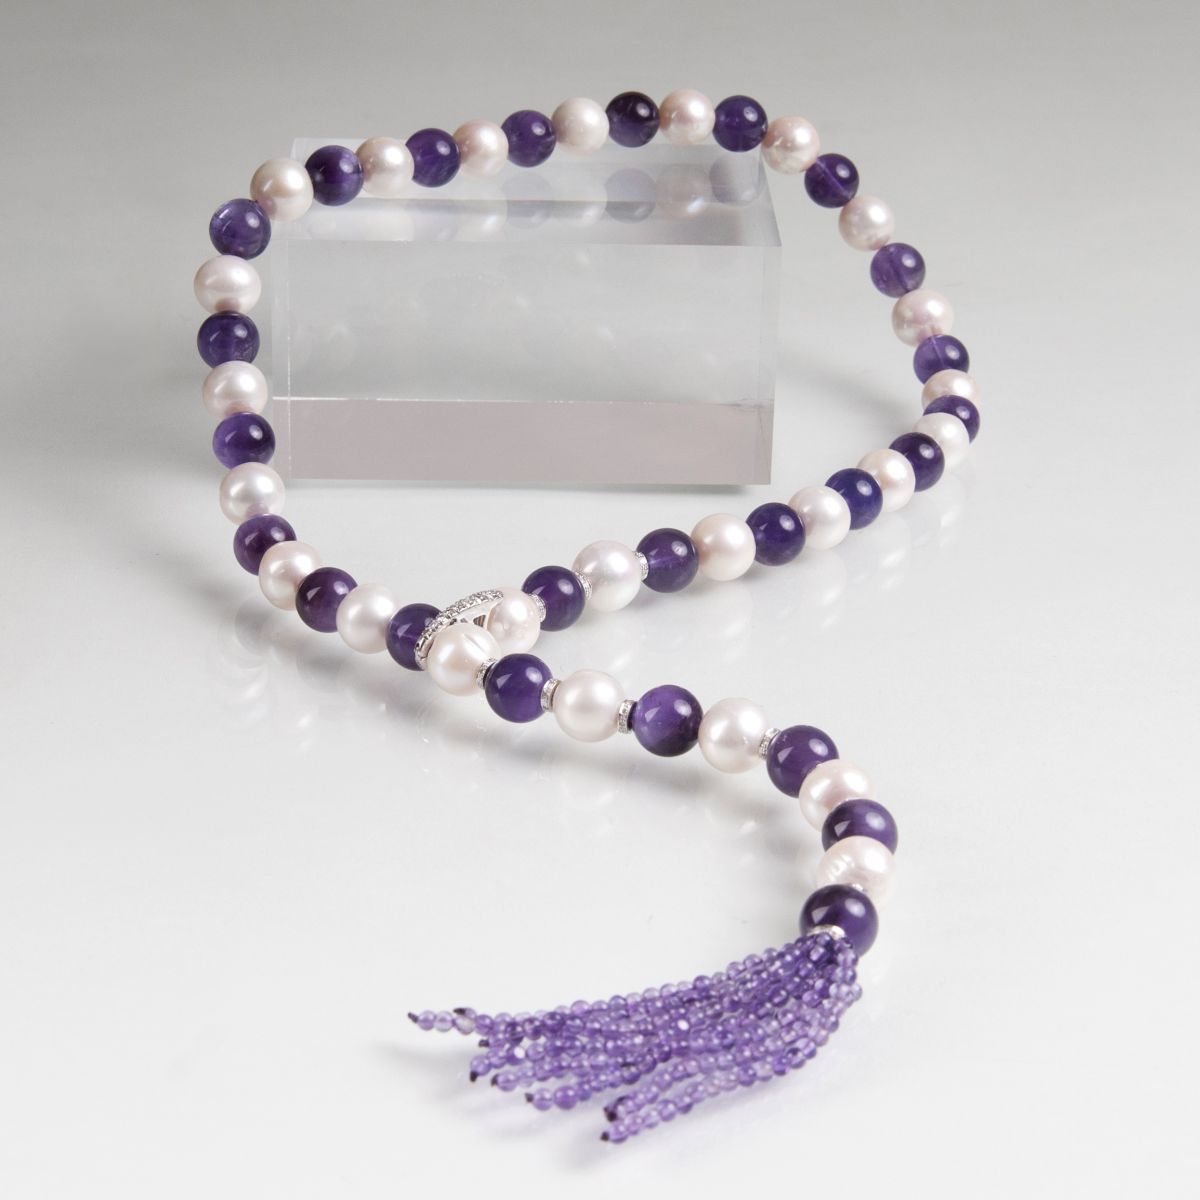 A long pearl amethyst necklace with tassel pendant